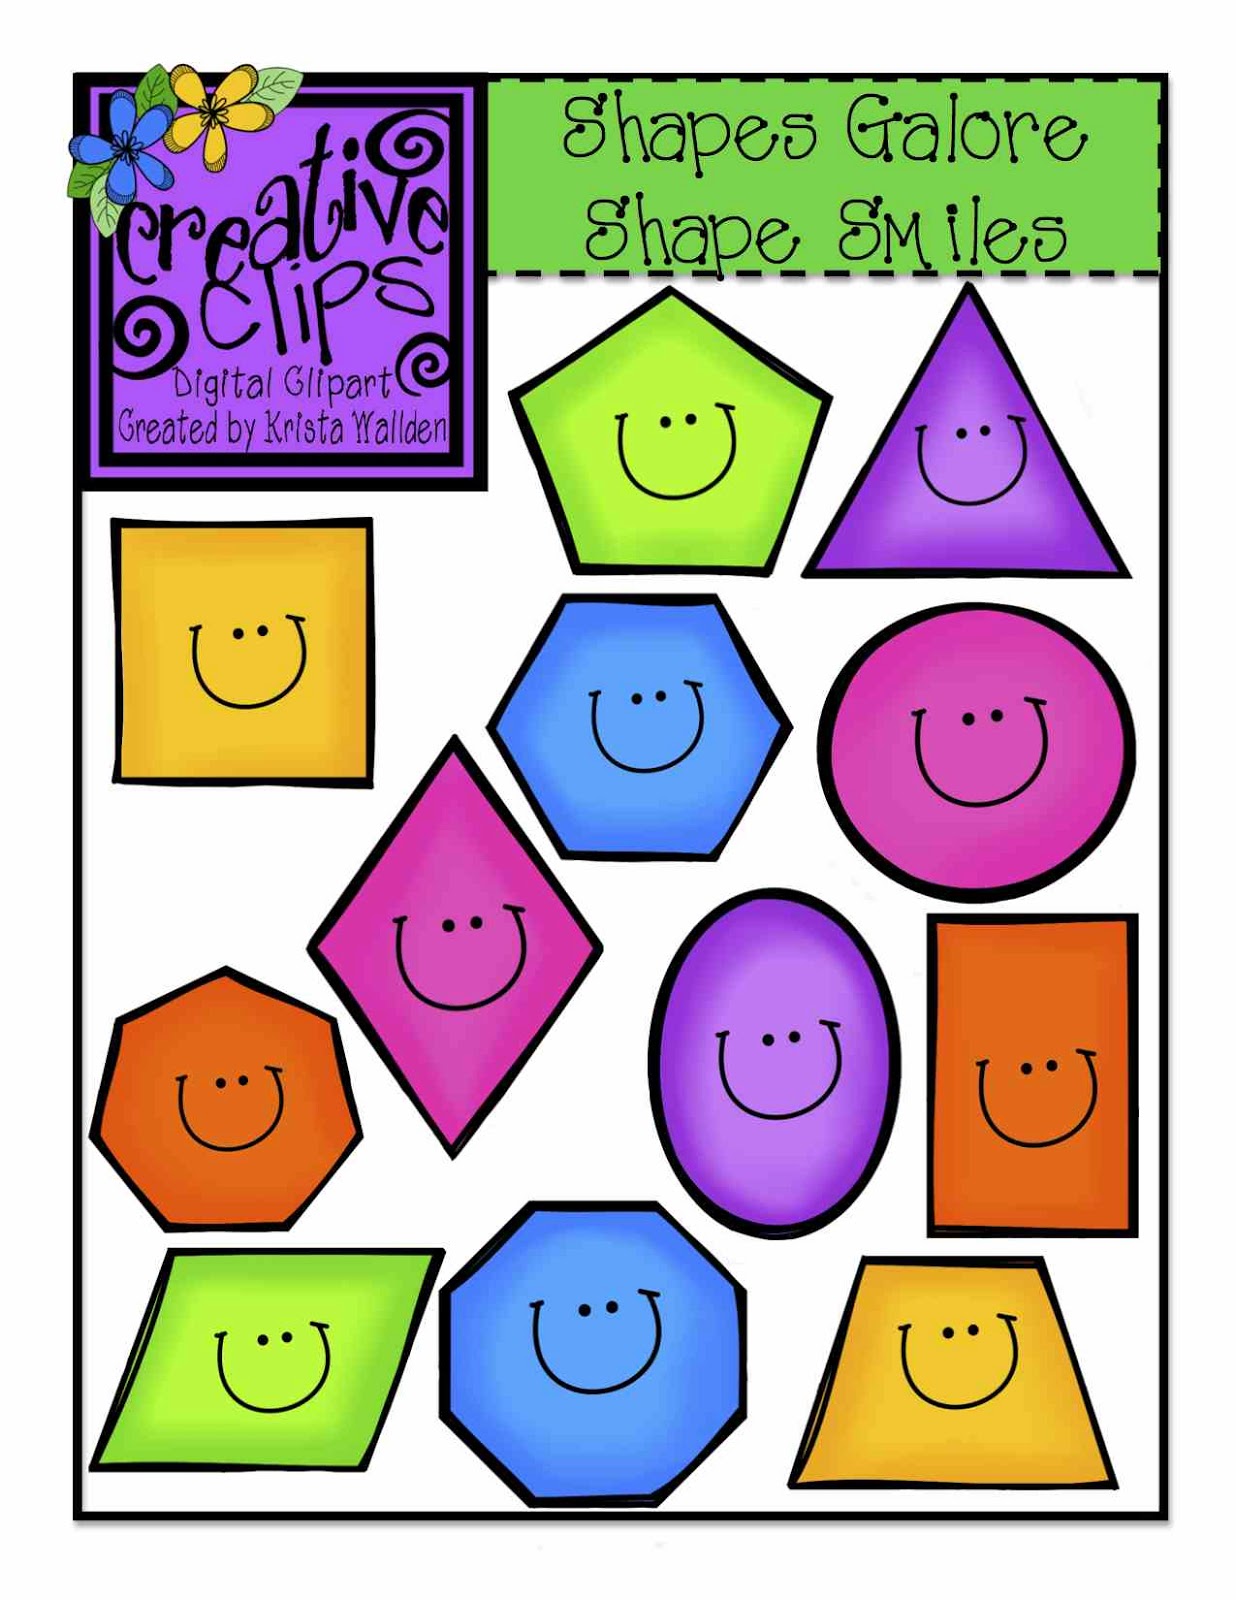 Free clipart shapes